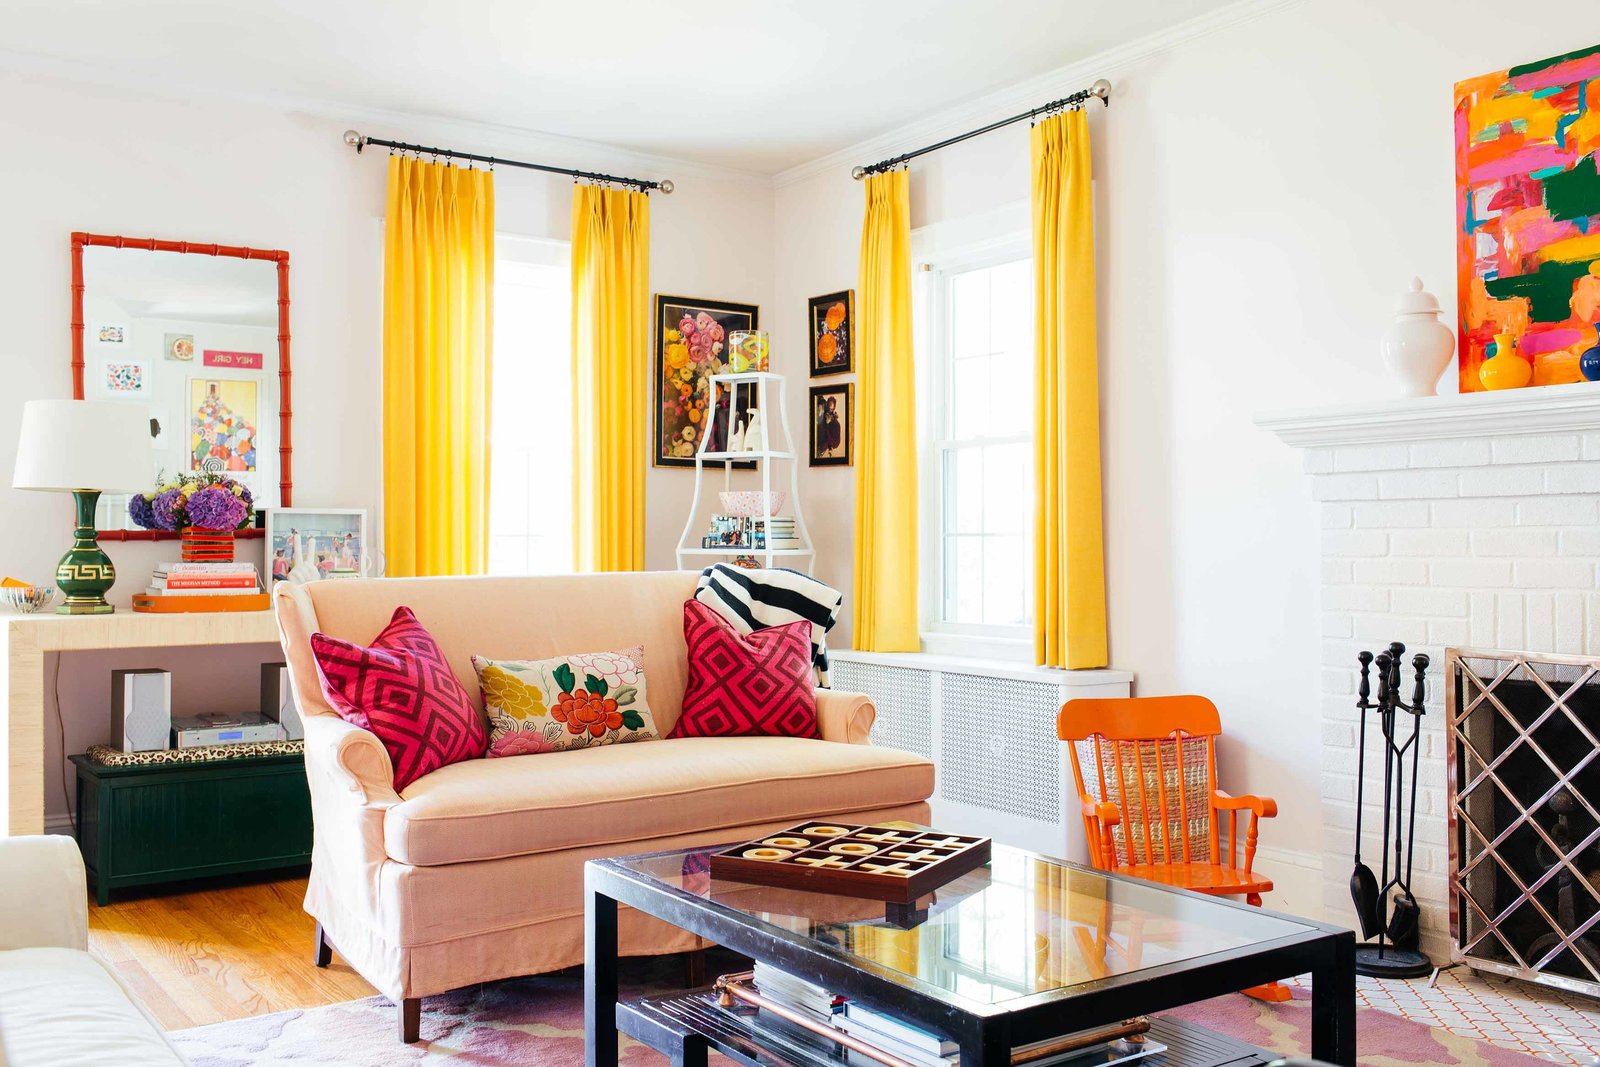 A colorfully decorated living space in Westbury, NY.